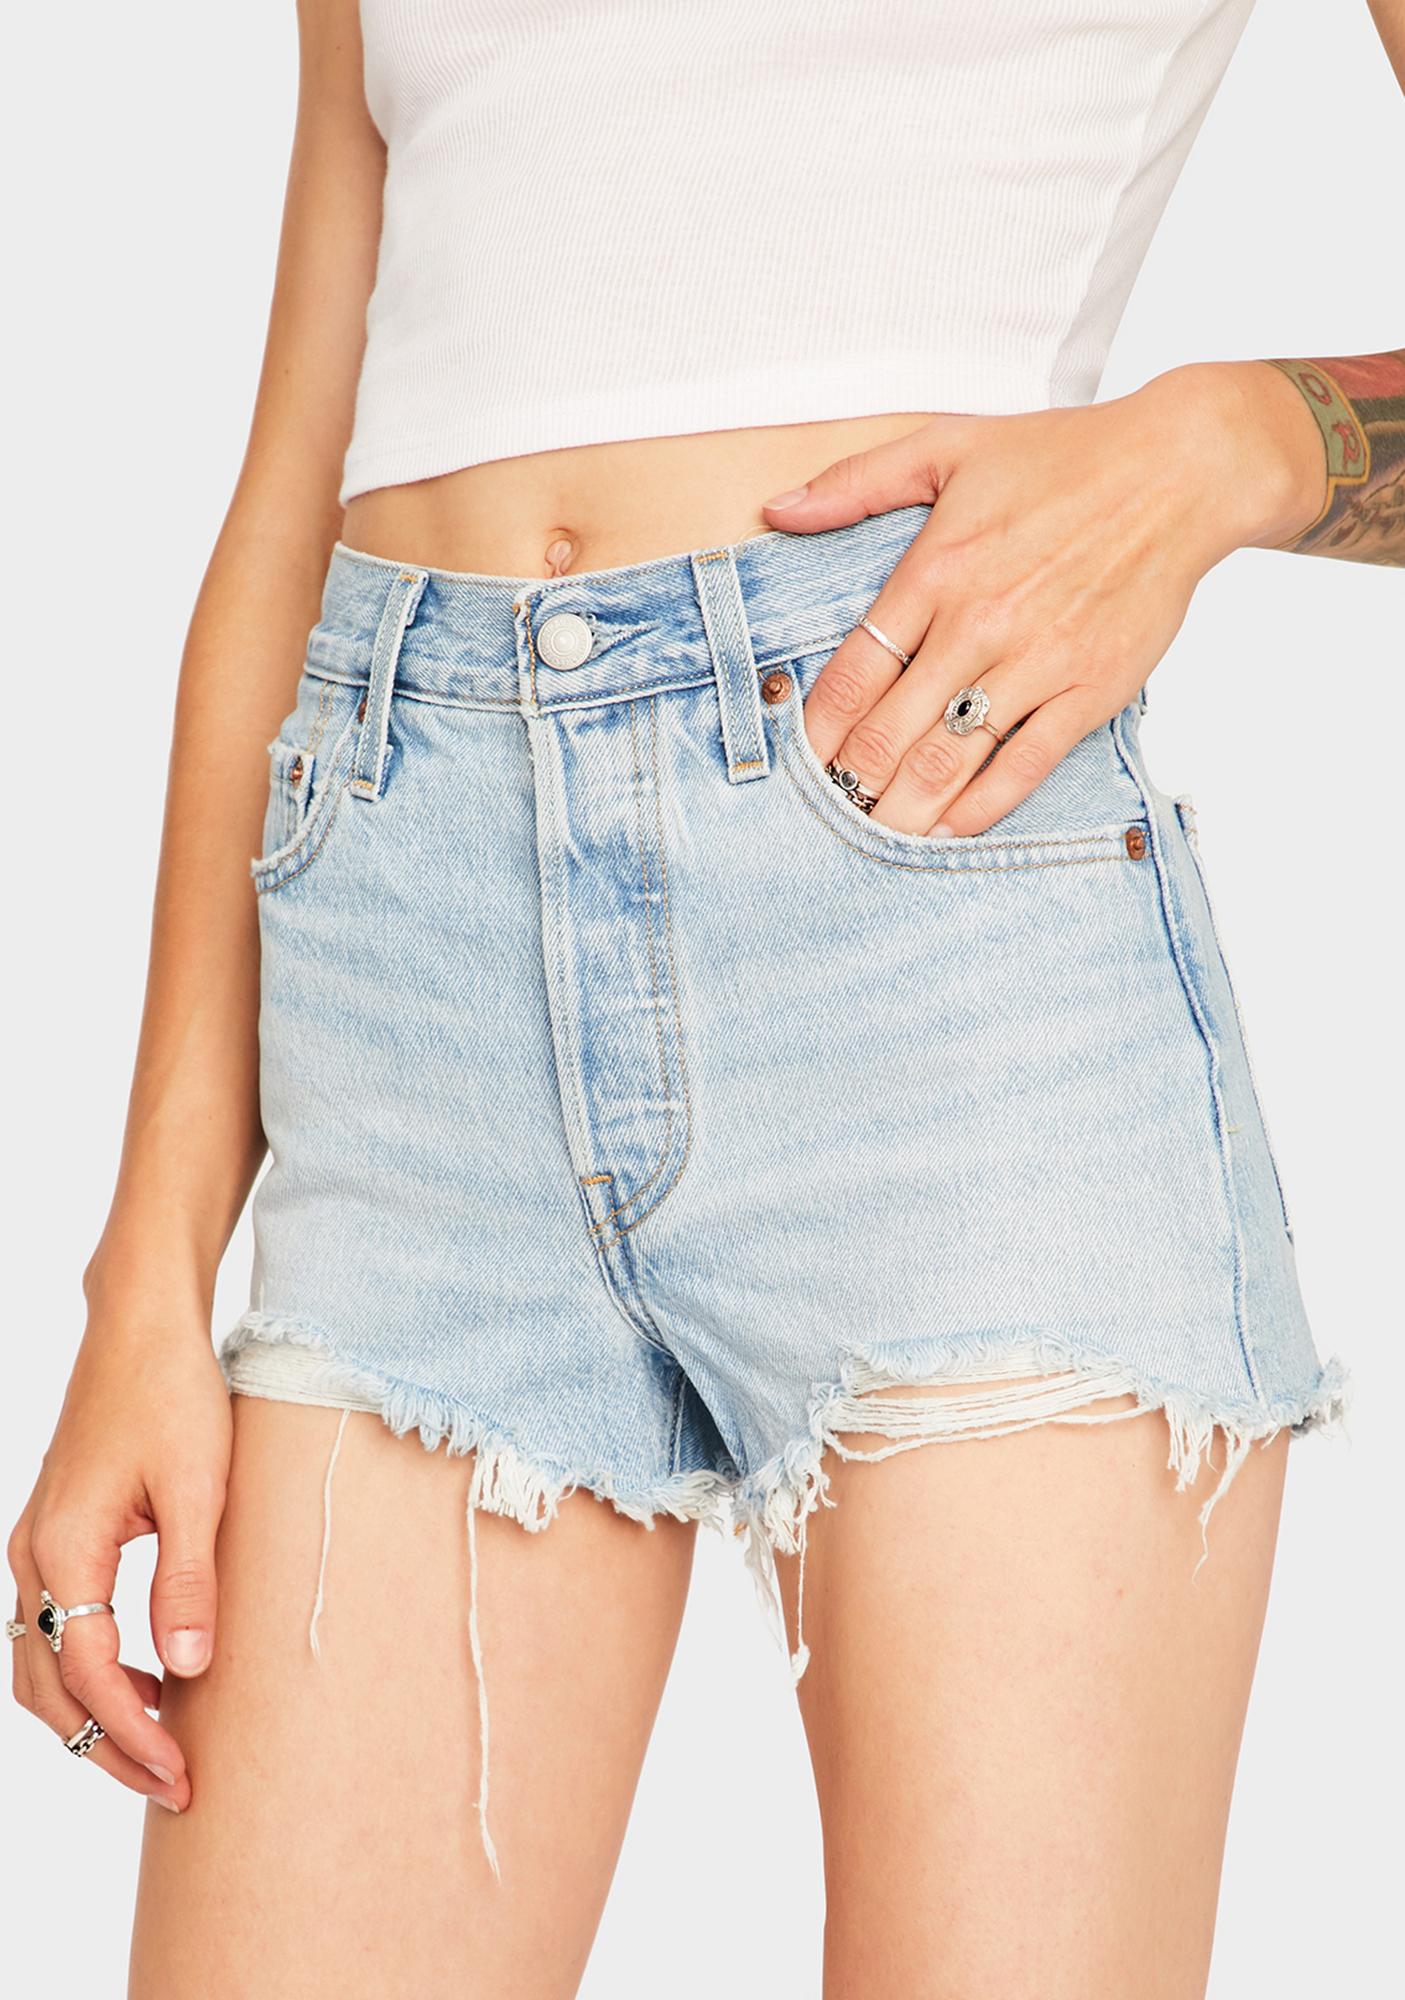 levi's 501 high rise short bring to light